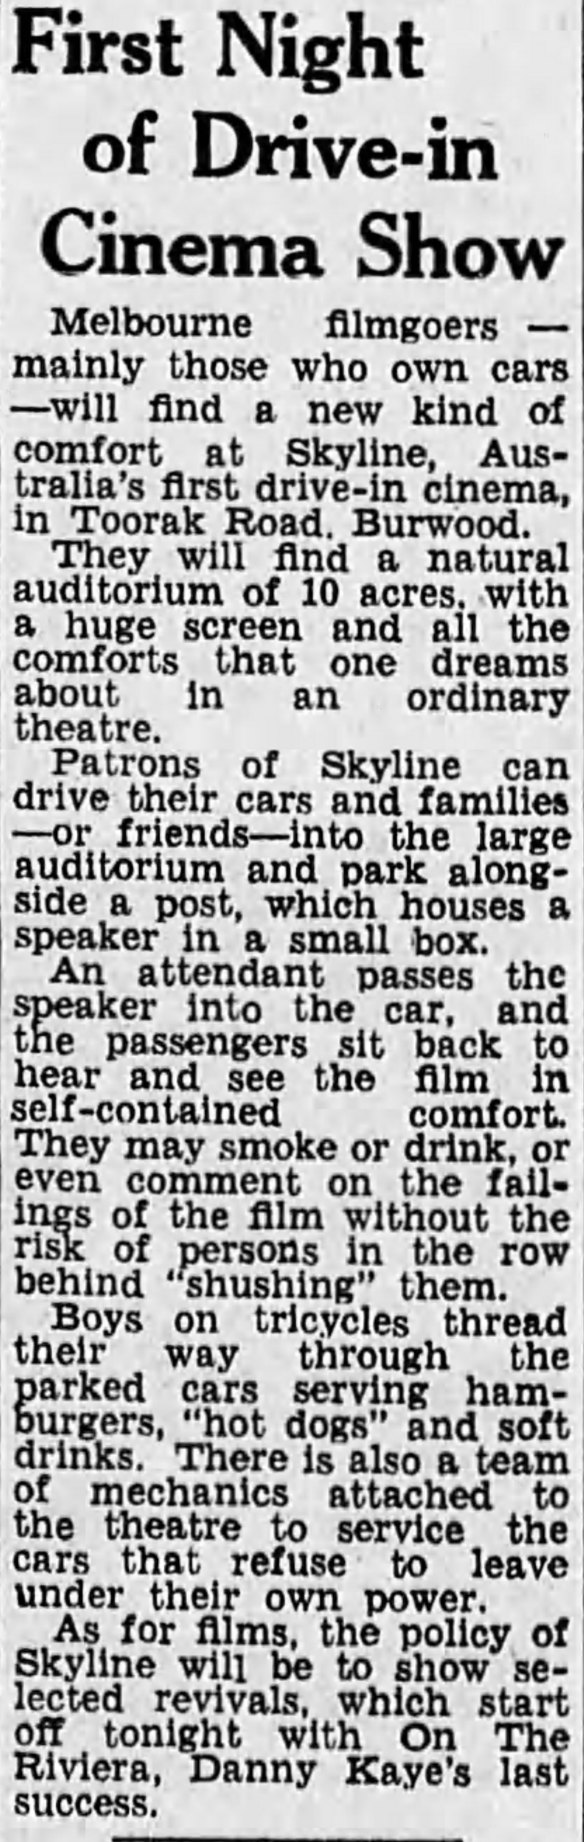 Skyline Drive-In opened in Burwood in 1954 and was the first drive-in cinema in Australia.